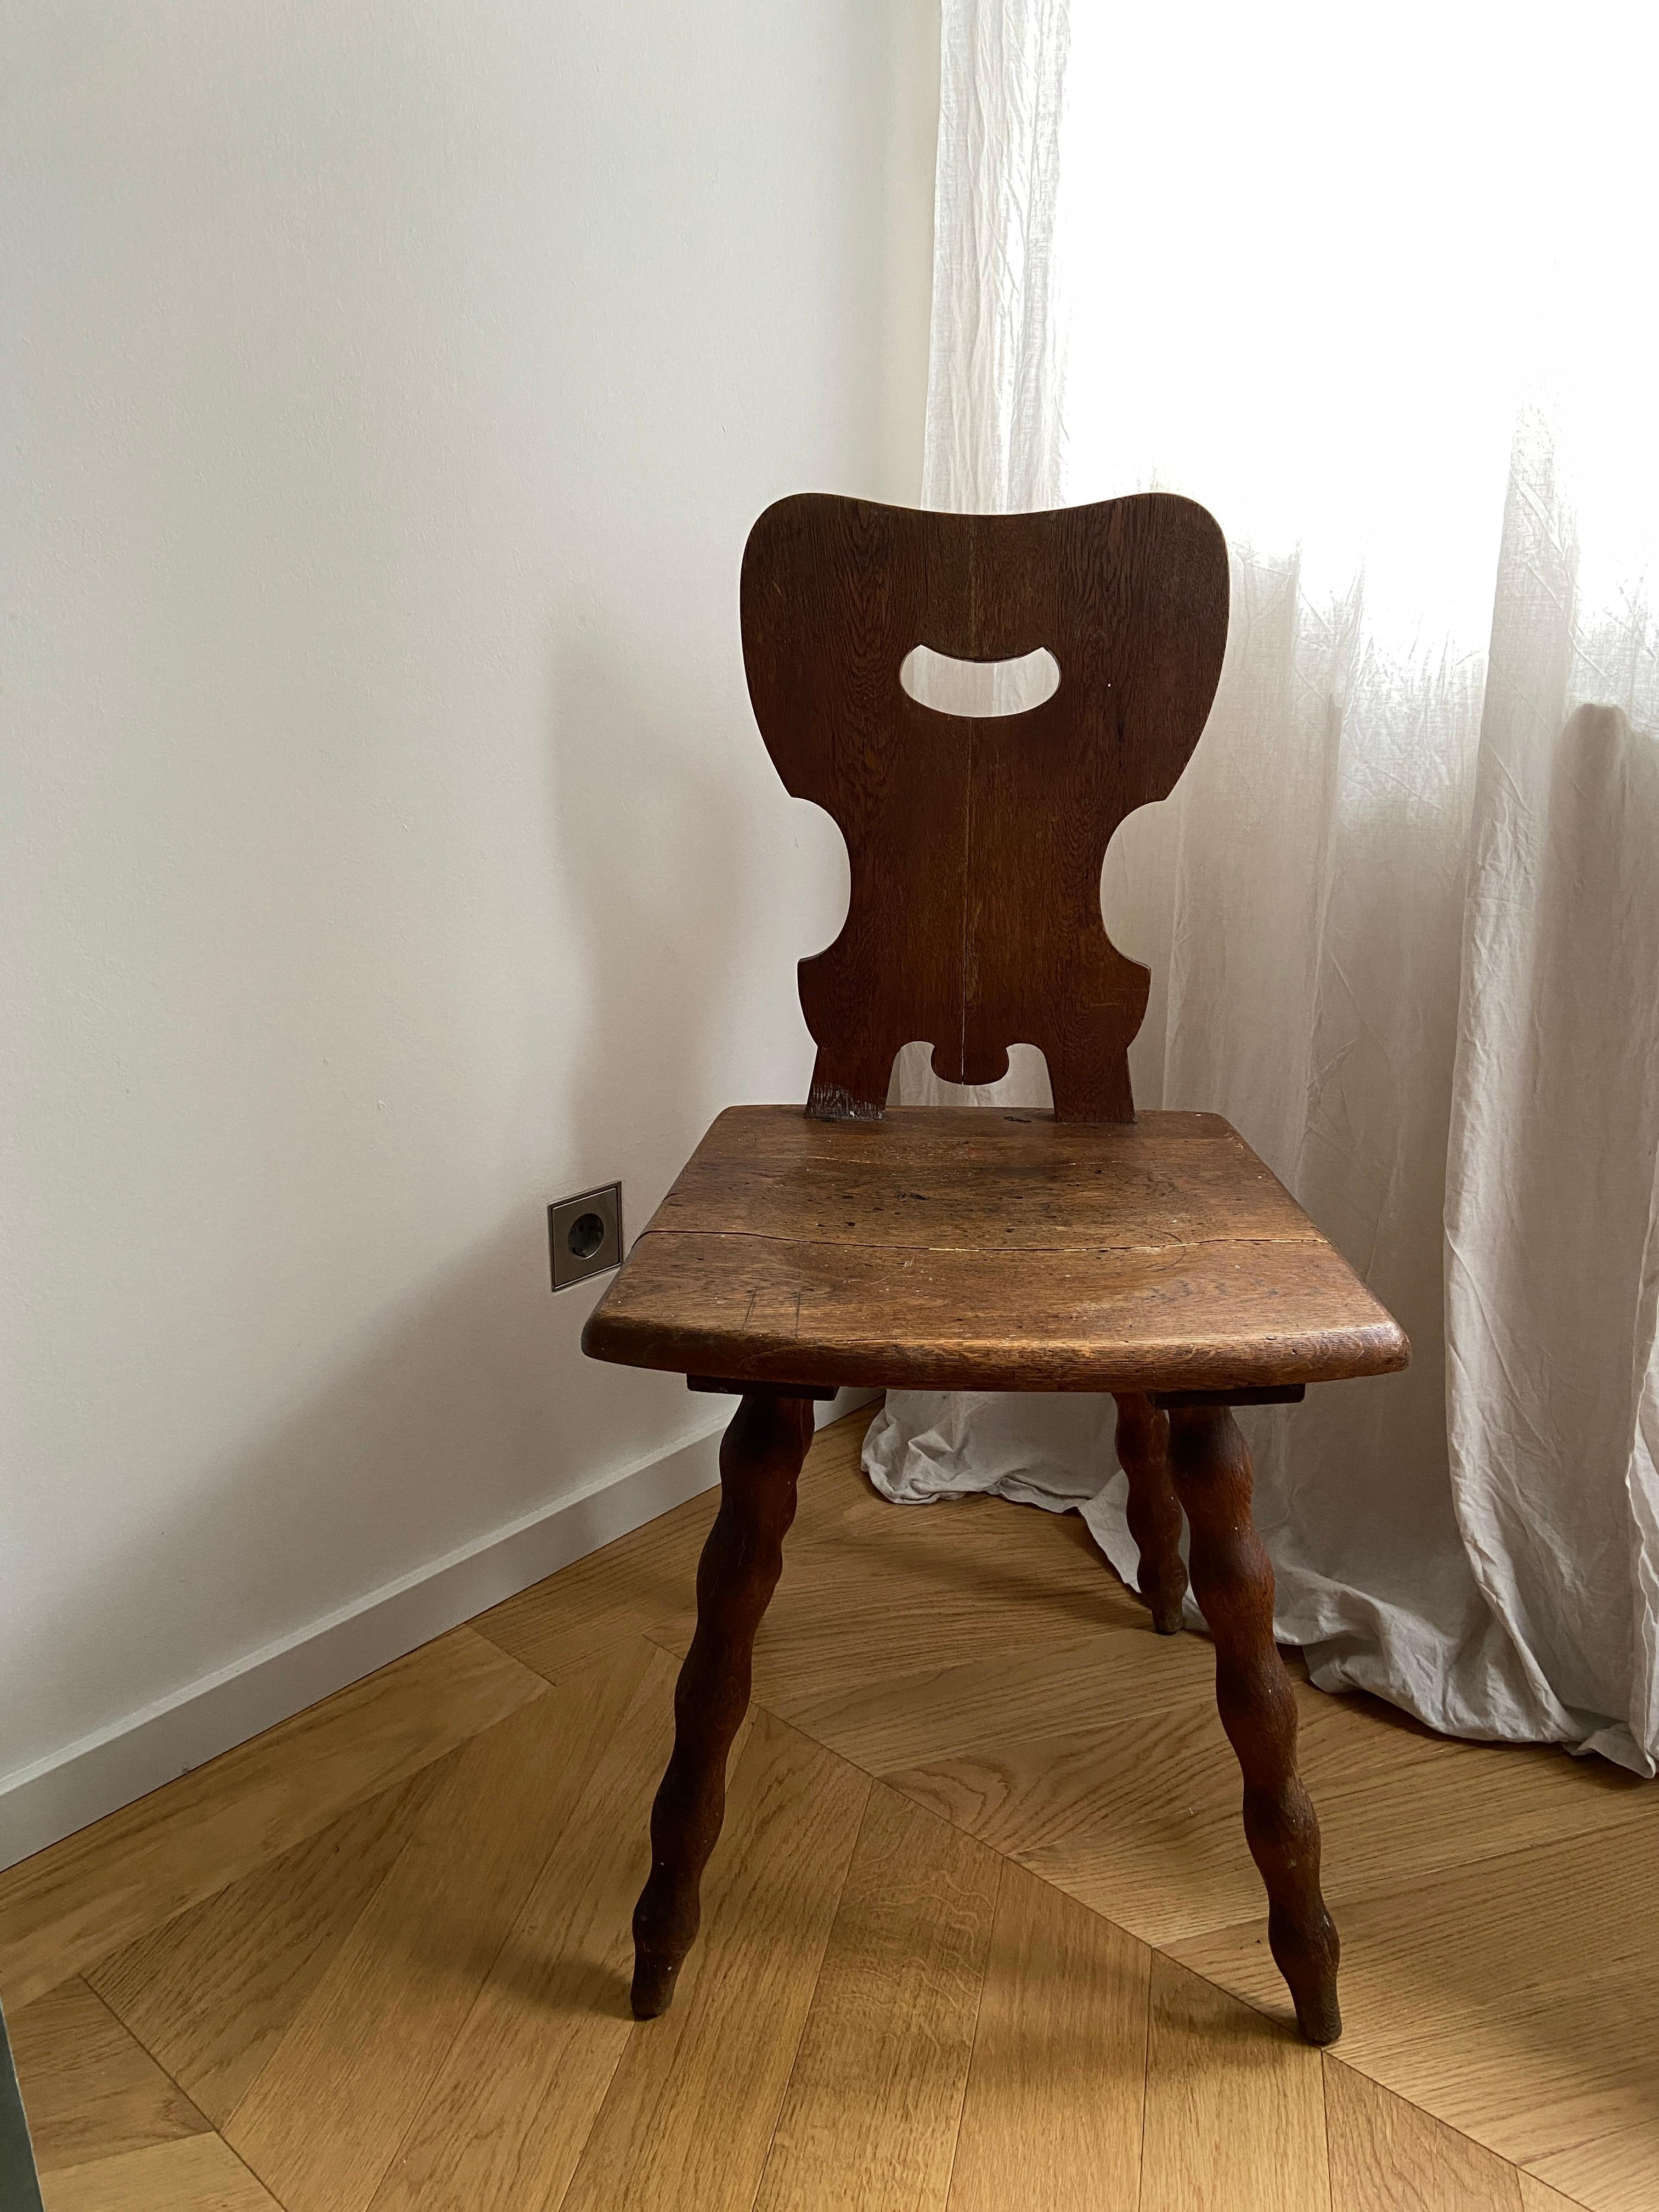 This beautiful old German Stabelle is a typical farmers' chair.
This chair has unique bobbin legs.
The chair is primitivly made. The construction is based on an interlocking system. 
The tradition behind these chairs are that during the colder